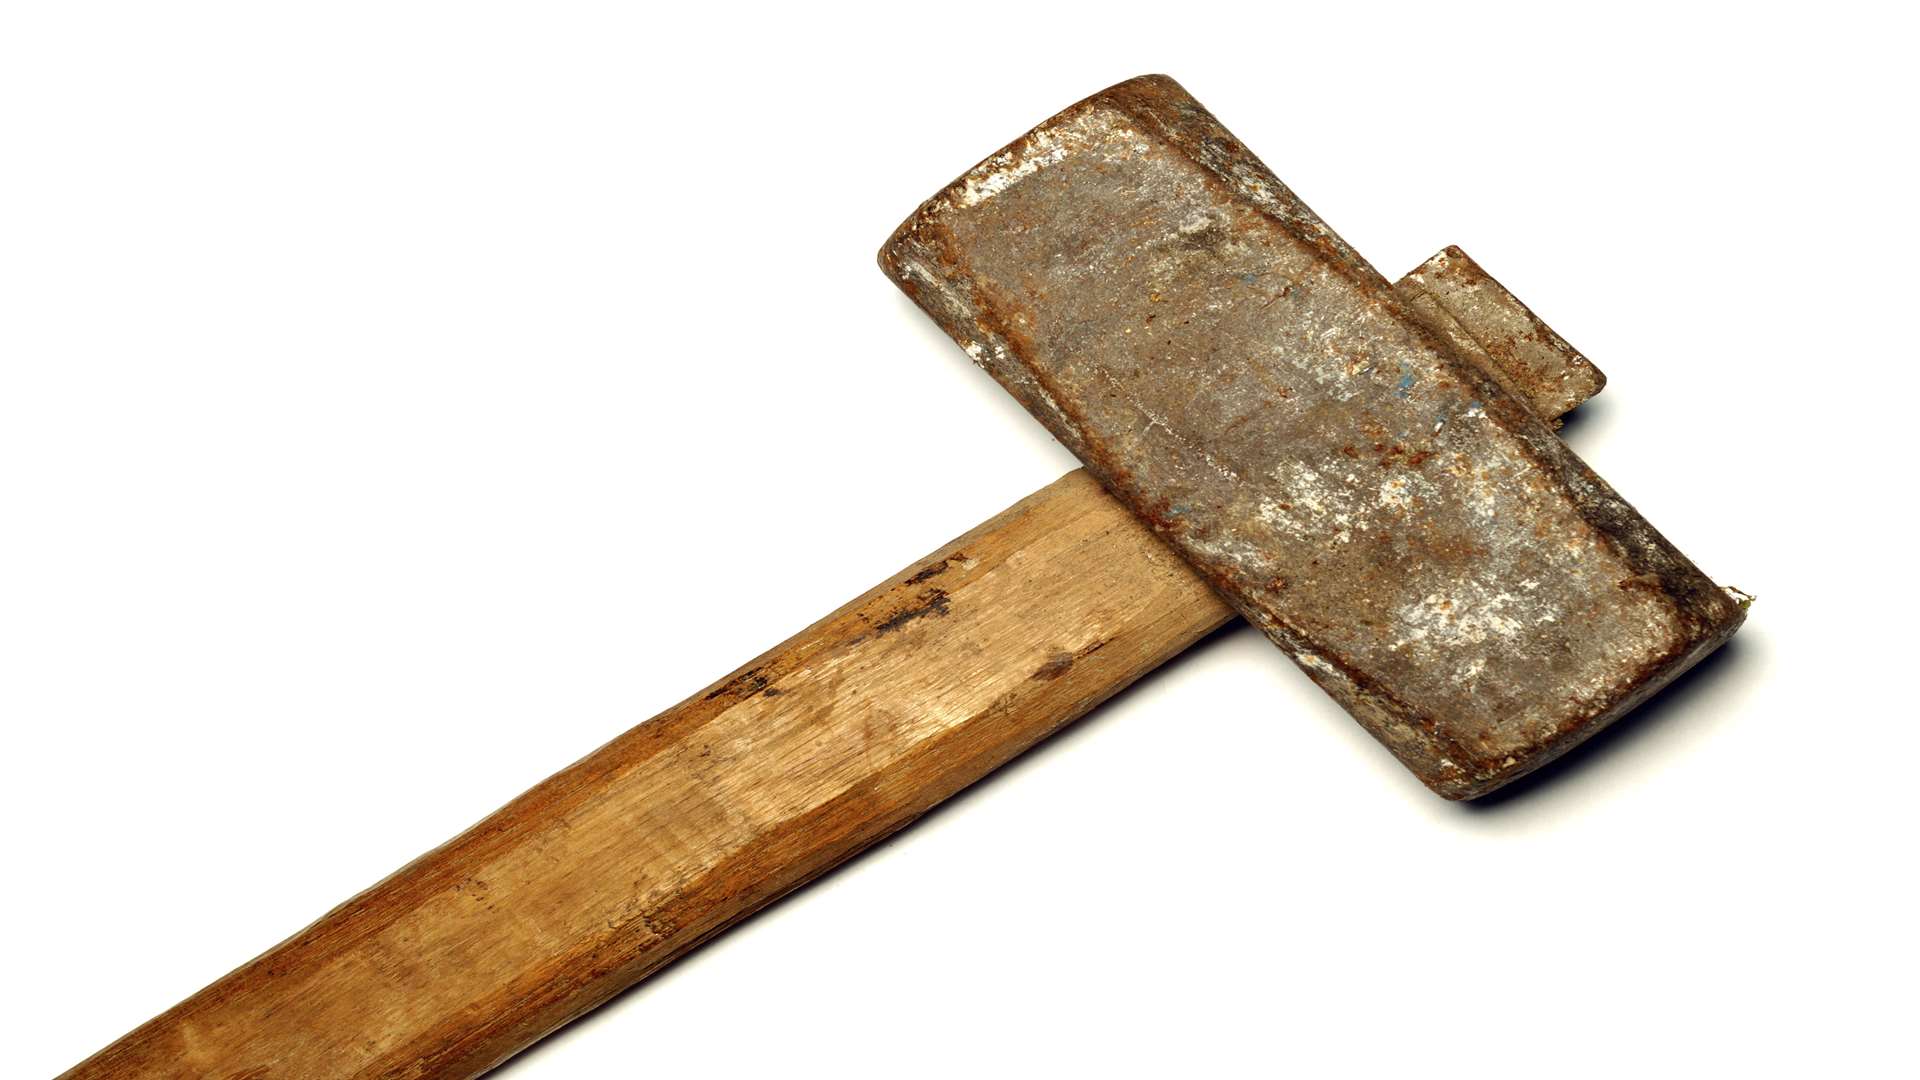 Martin armed himself with a hammer in the dispute over a shared drive. Stock image